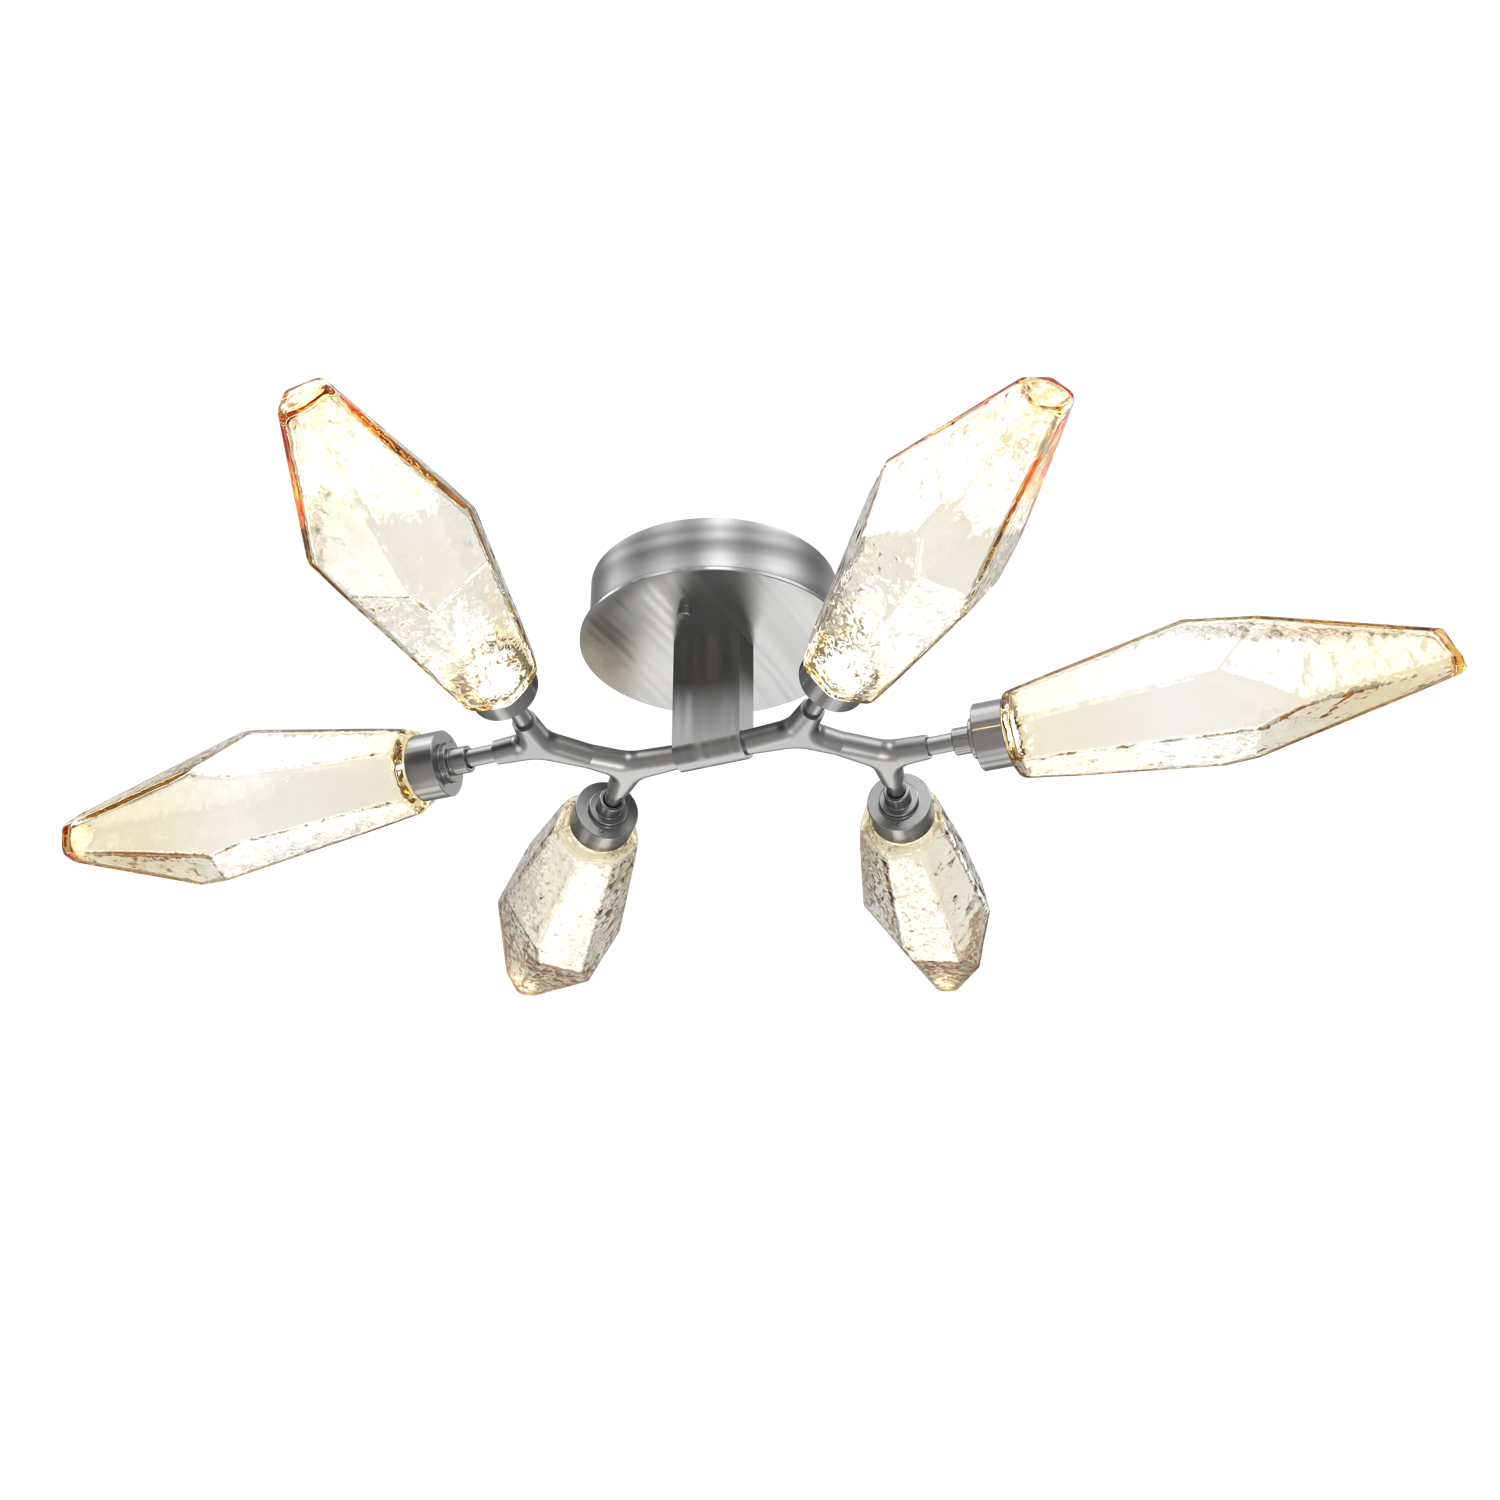 CLB0050-01-SN-CA-Hammerton-Studio-Rock-Crystal-flush-mount-light-with-satin-nickel-finish-and-chilled-amber-blown-glass-shades-and-LED-lamping